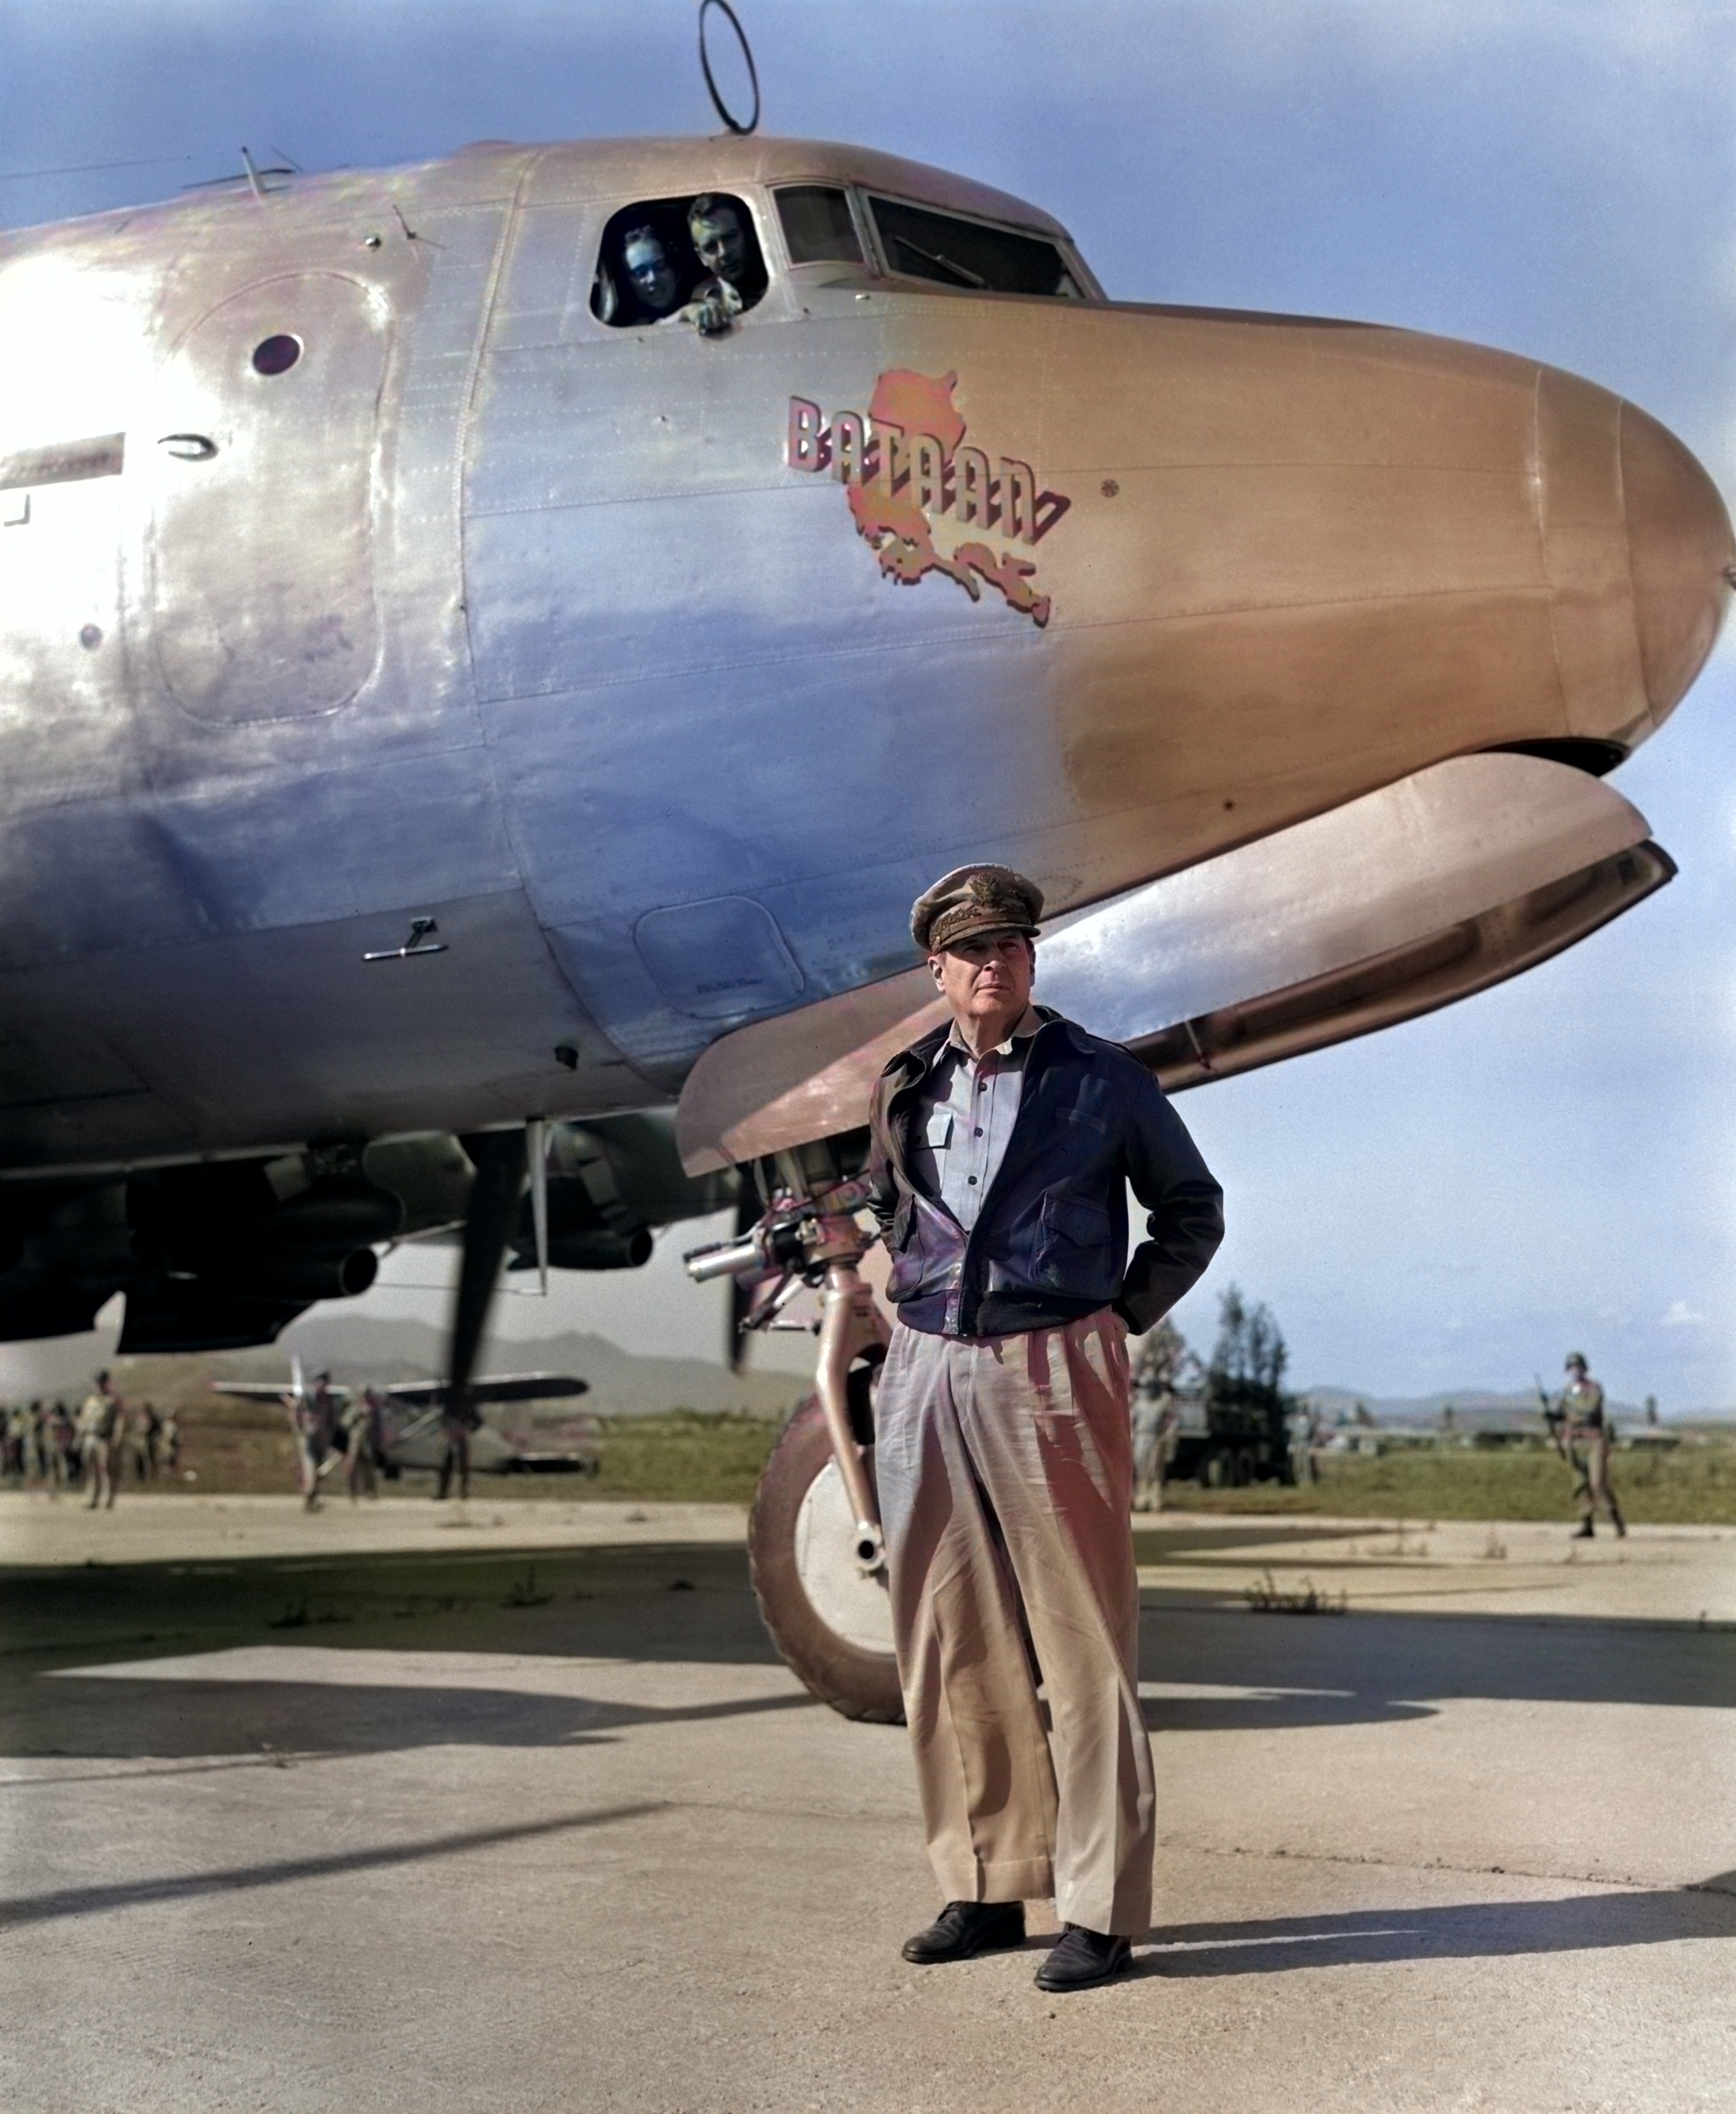 Douglas MacArthur in Korea, 1950-1951; note MacArthur's personal C-54 Skymaster transport aircraft 'Bataan' [Colorized by WW2DB]